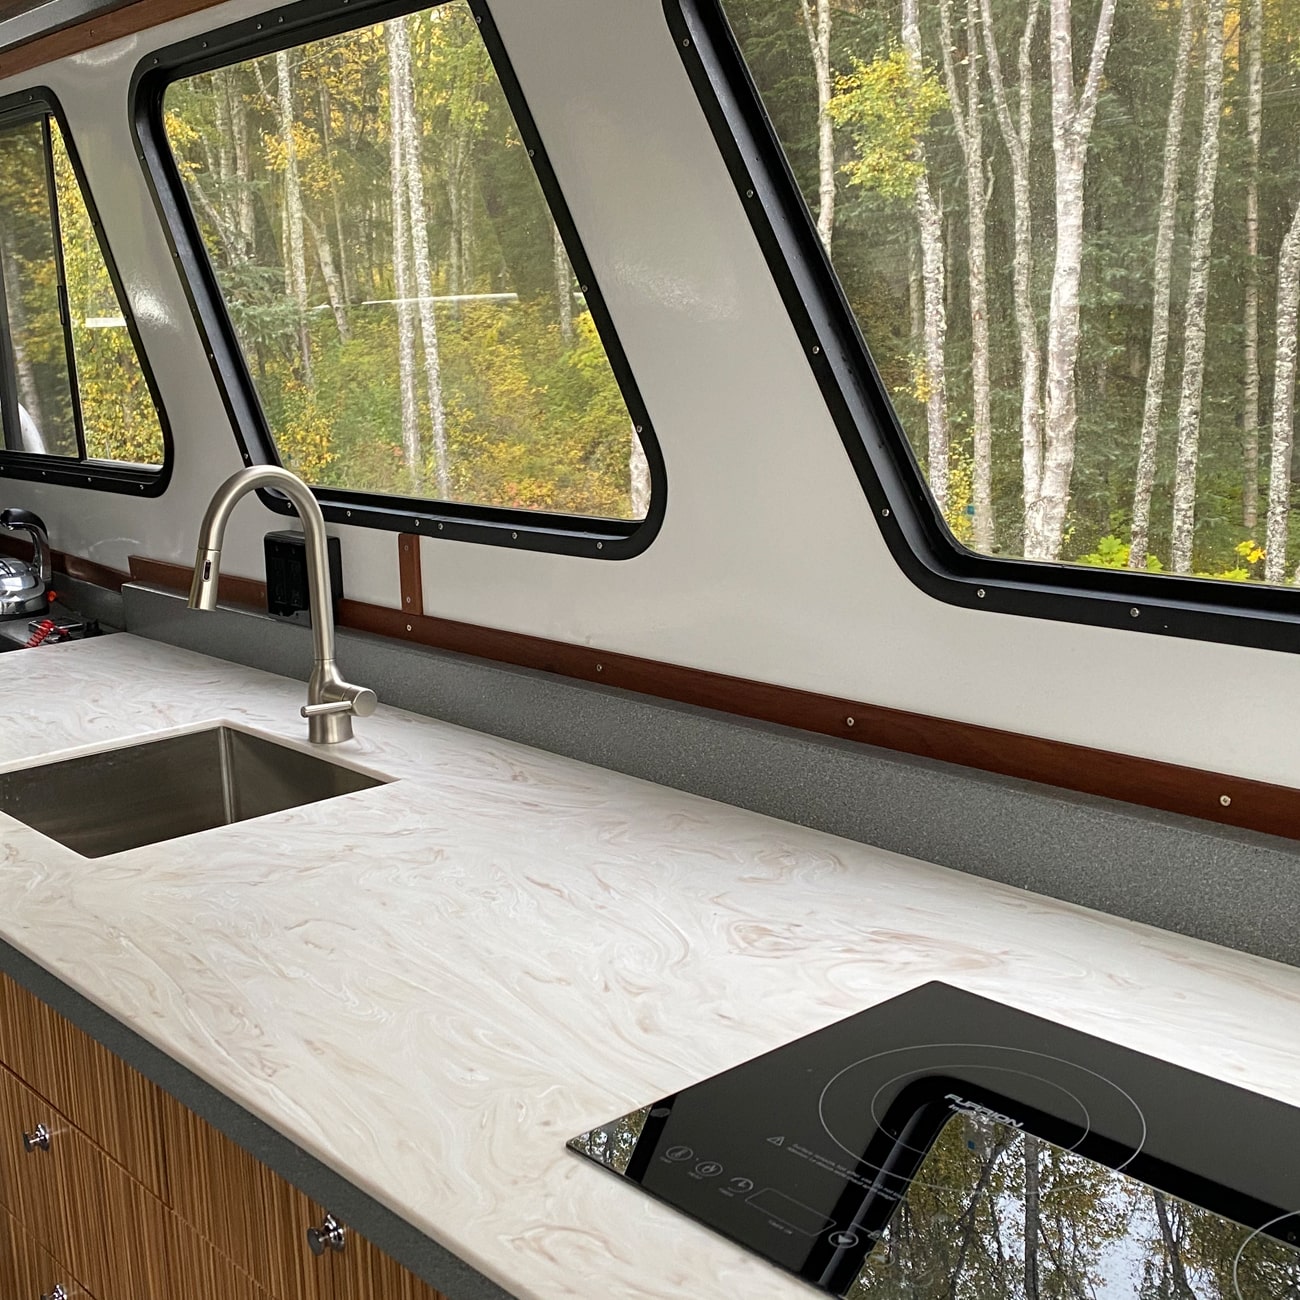 Galley of 36 foot aluminum Cuddy Cabin boat manufactured Sidney BC British Columbia Canada by JR Marine